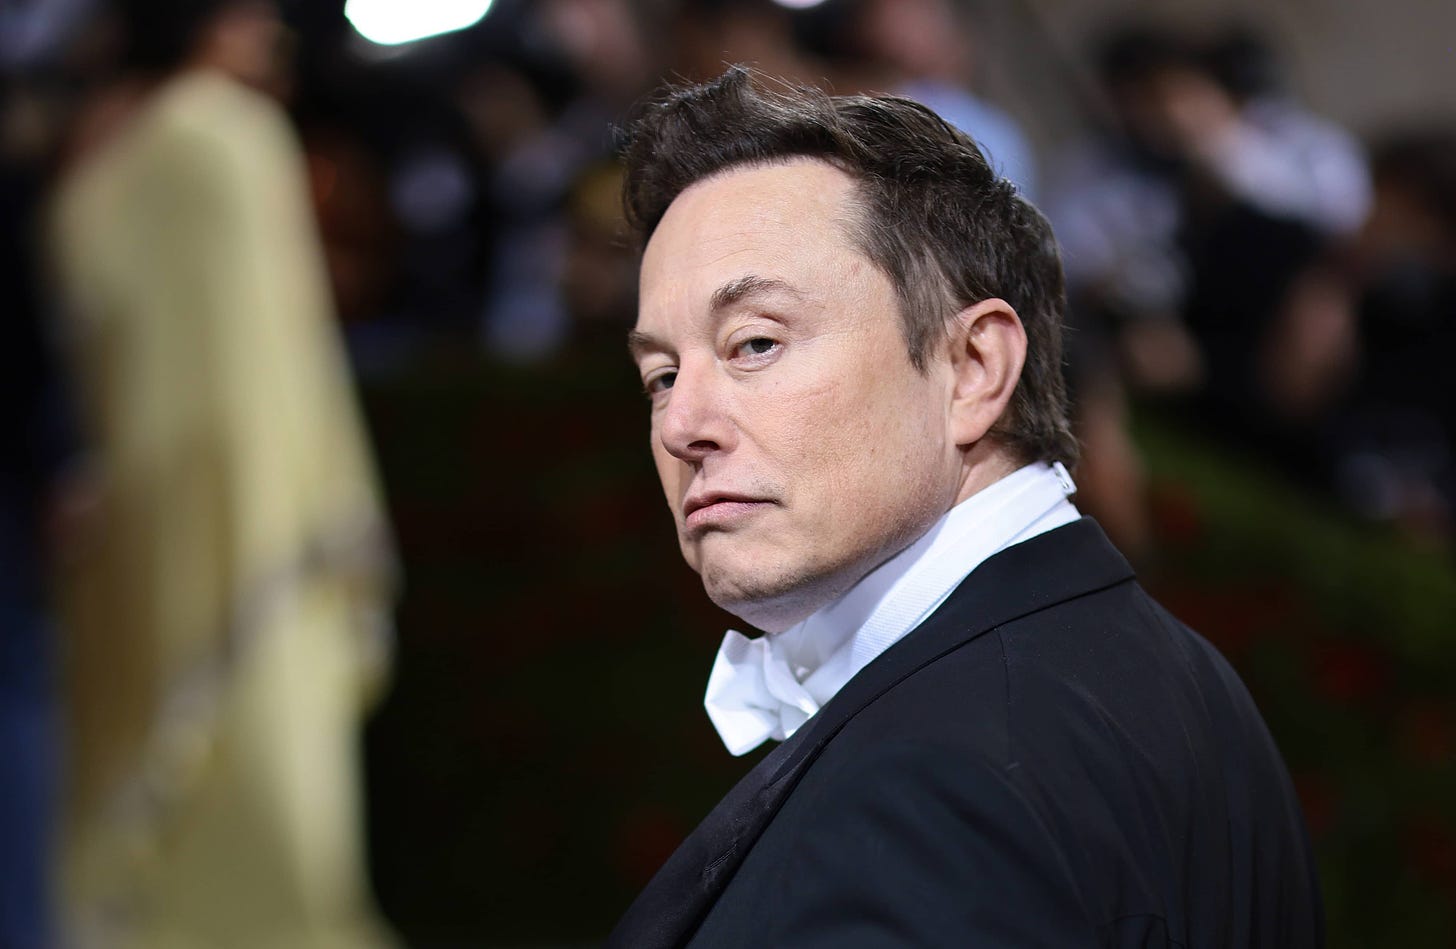 Why are progressives scared of Elon Musk? | The Spectator